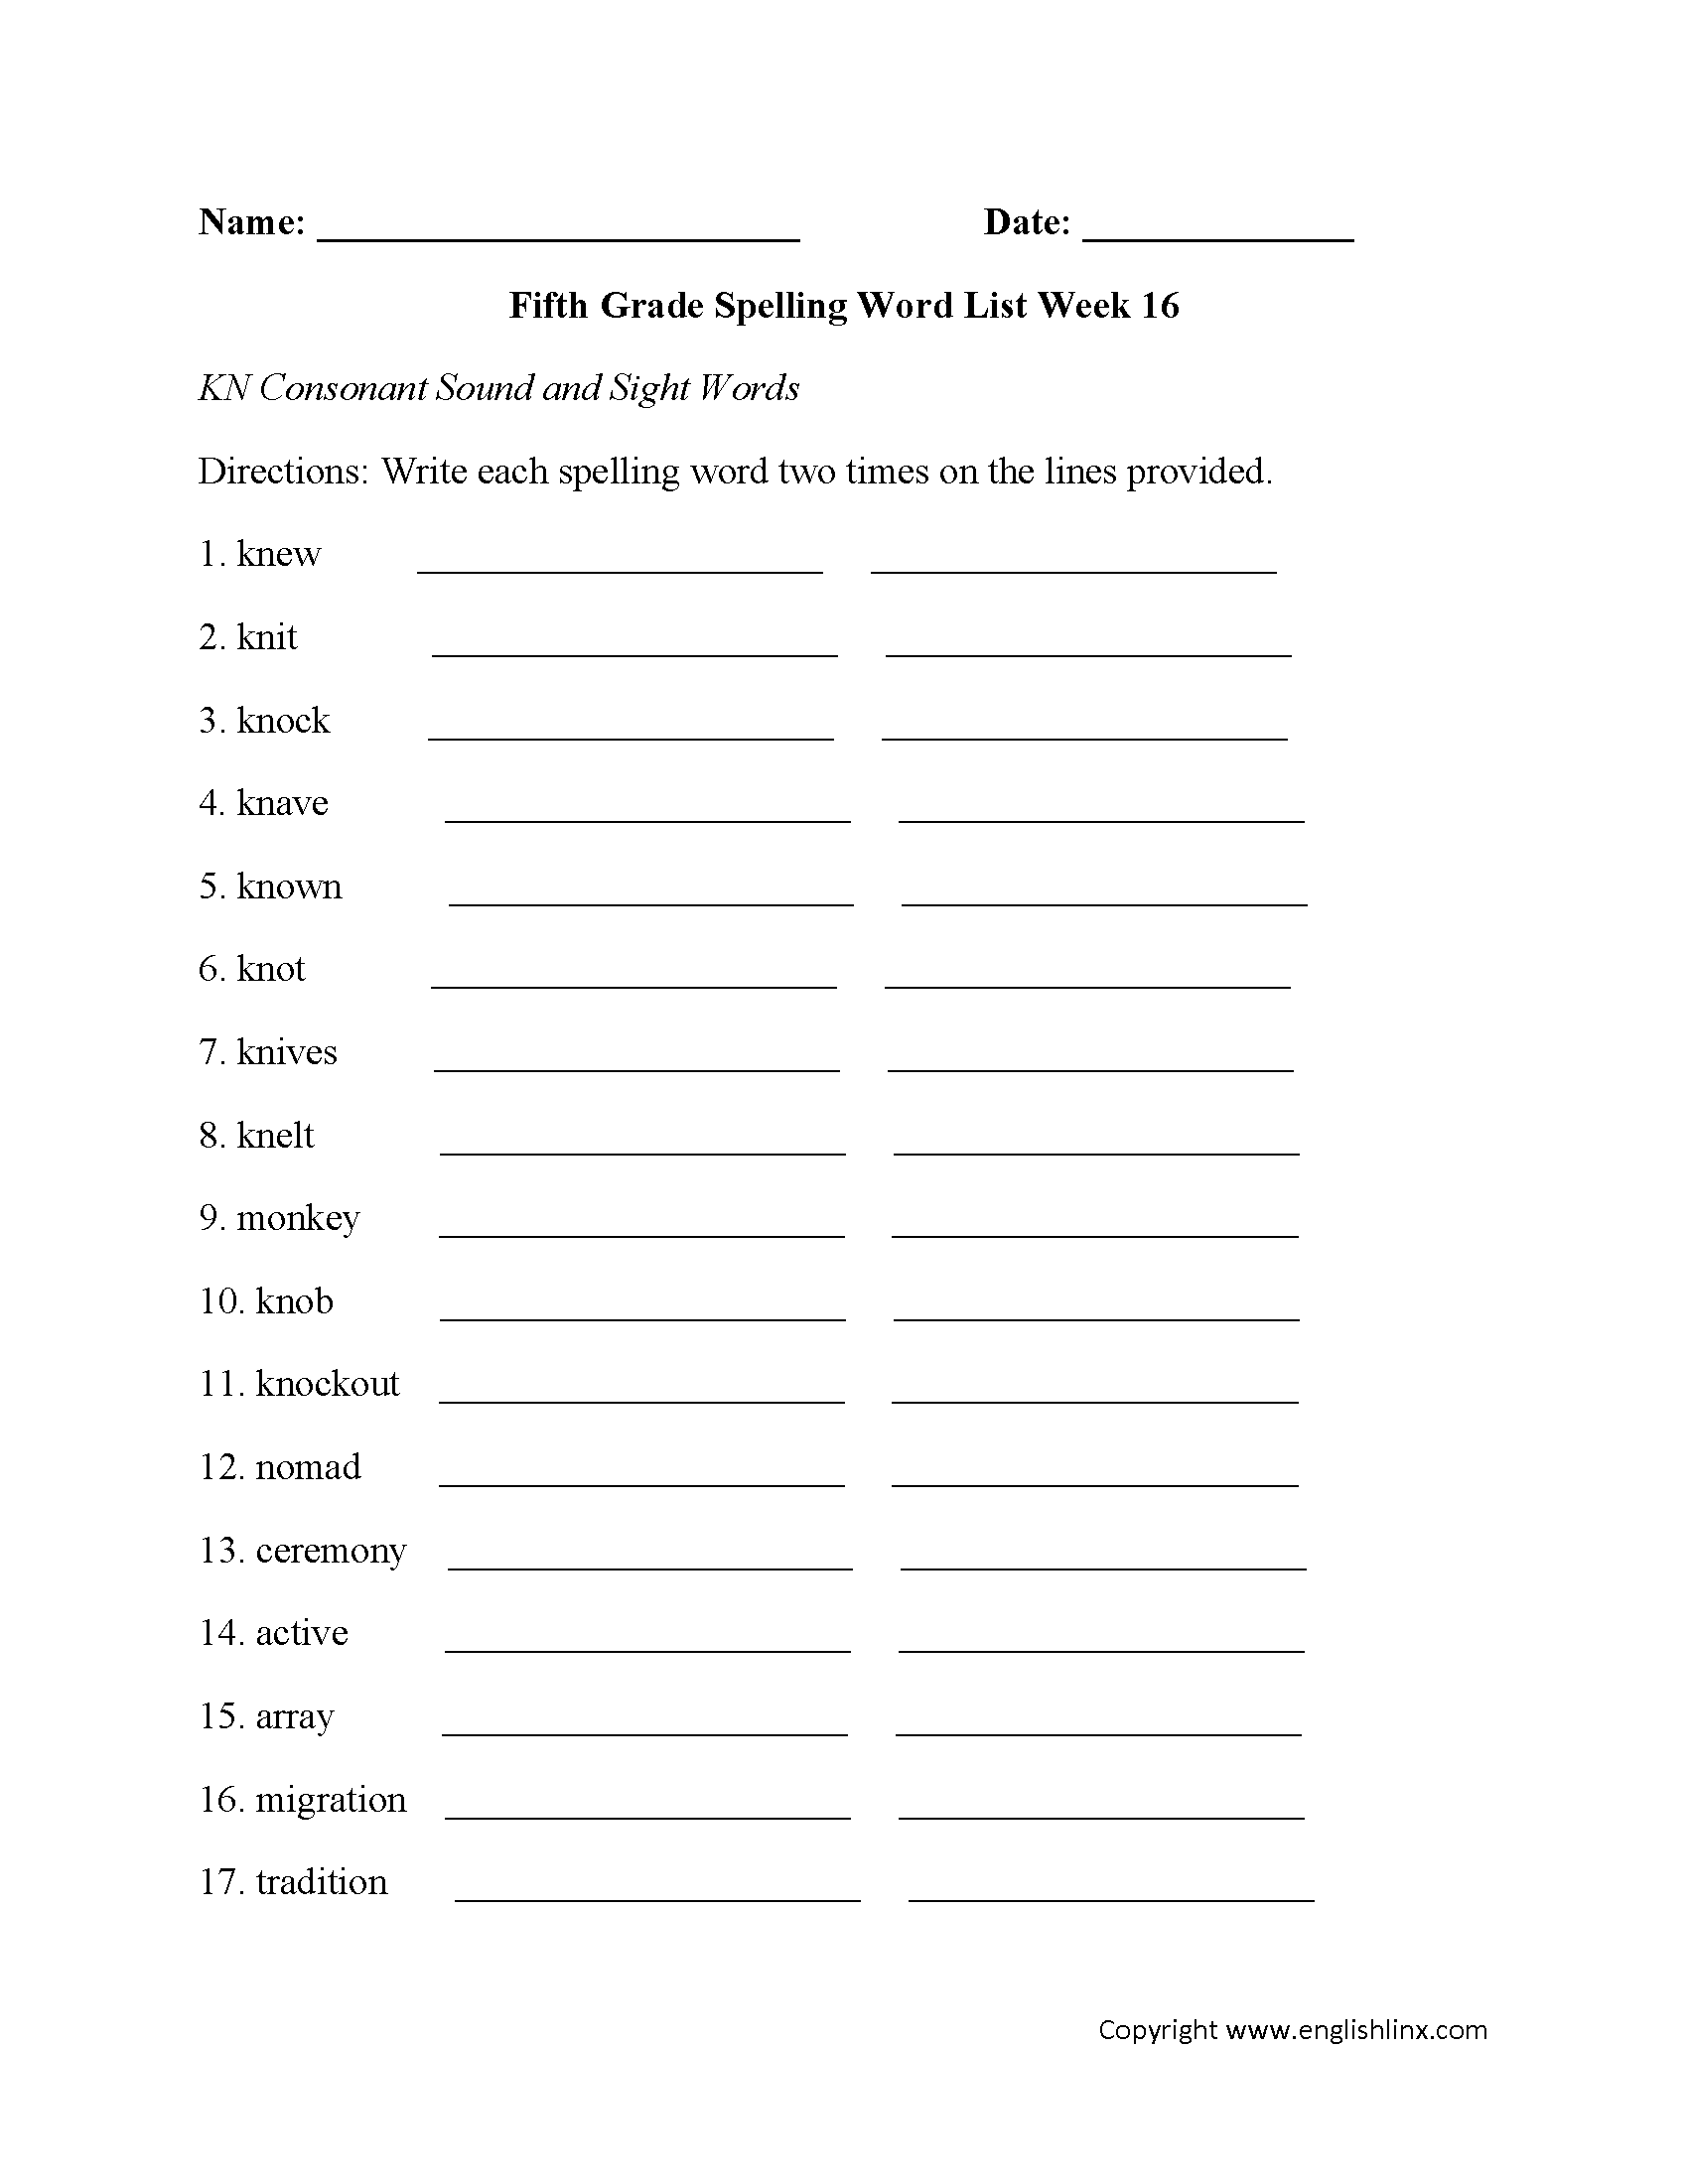 Week 16 Long KN Consonant and Sight Words Fifth Grade Spelling Words Worksheets